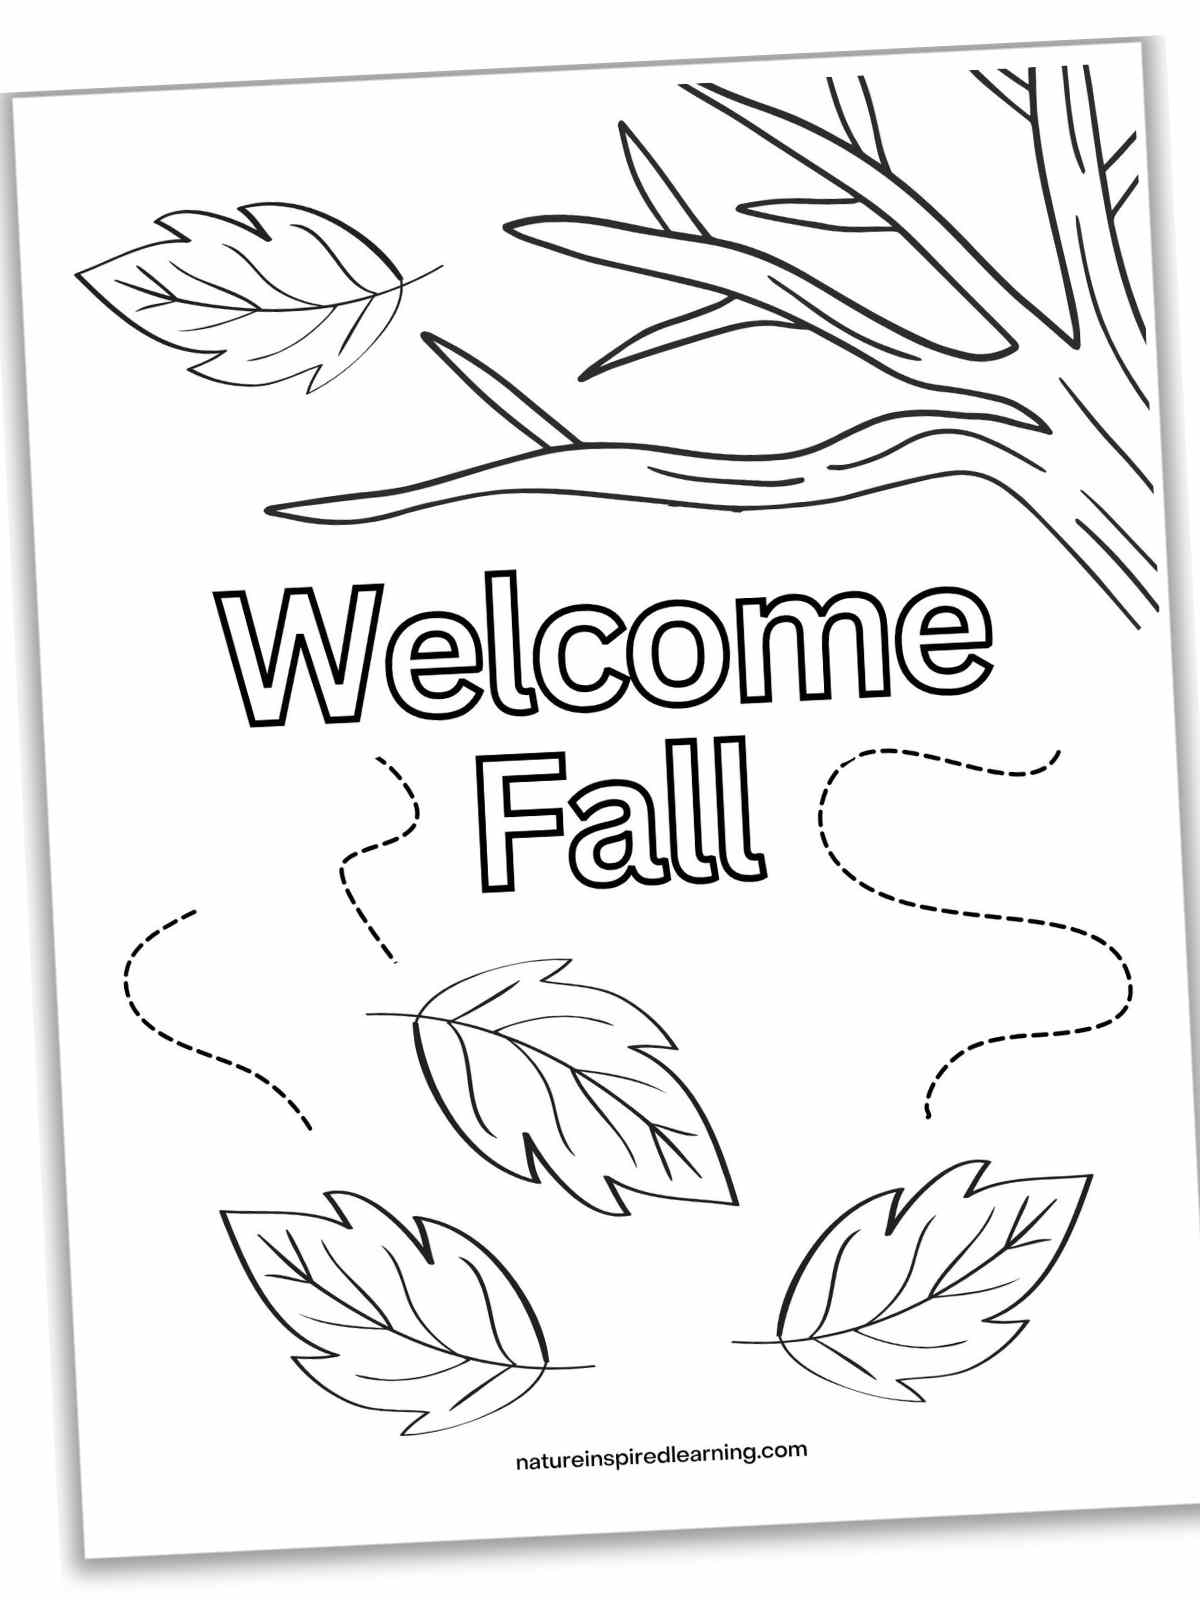 Black and white printable with Welcome Fall in outline form in between bare branches and leaves with curved dashed lines.